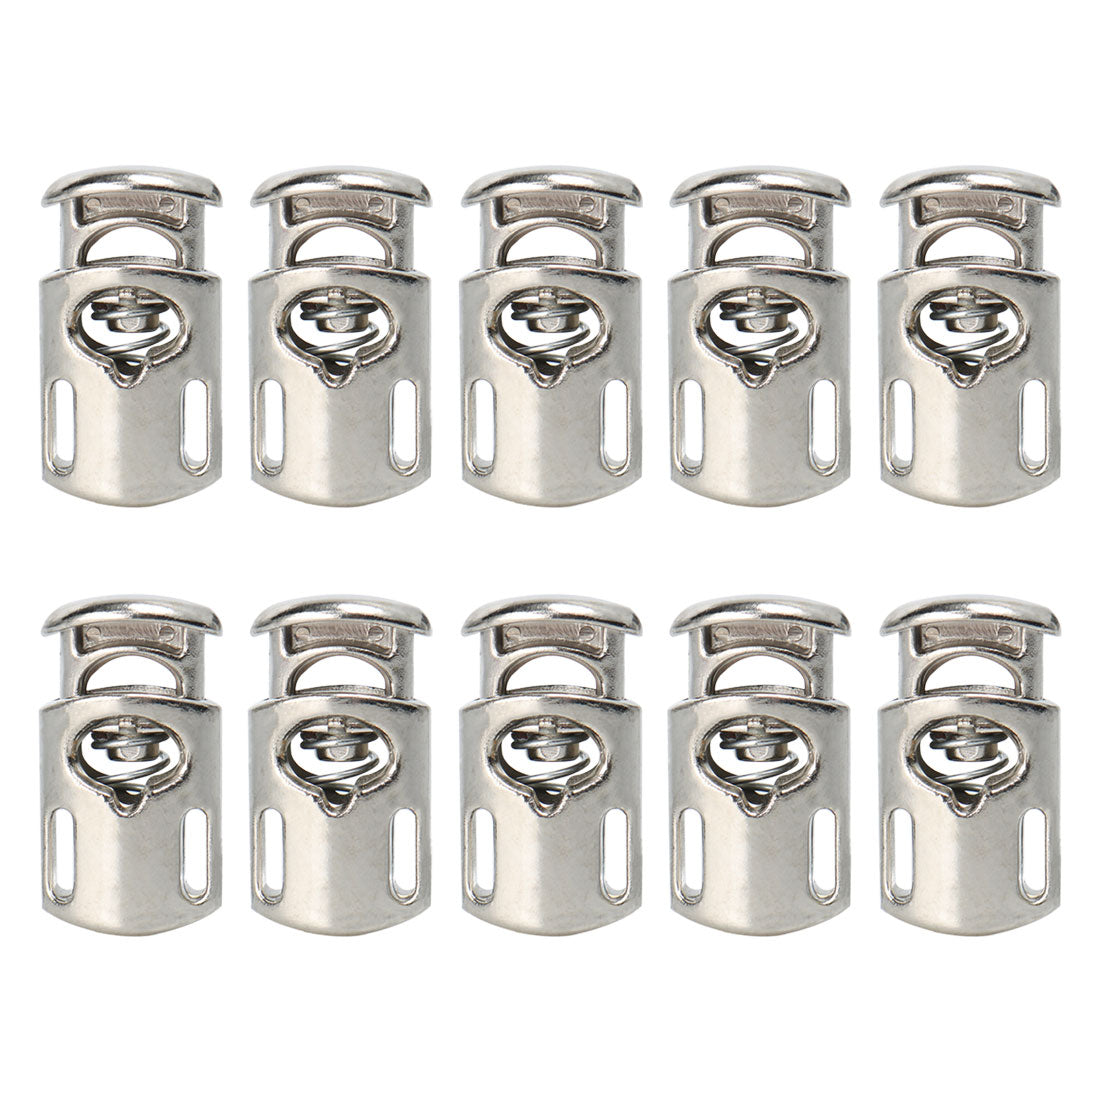 uxcell Uxcell 10pcs Plastic Cord Lock Stopper Spring Toggle Fastener Organizer Silver Tone